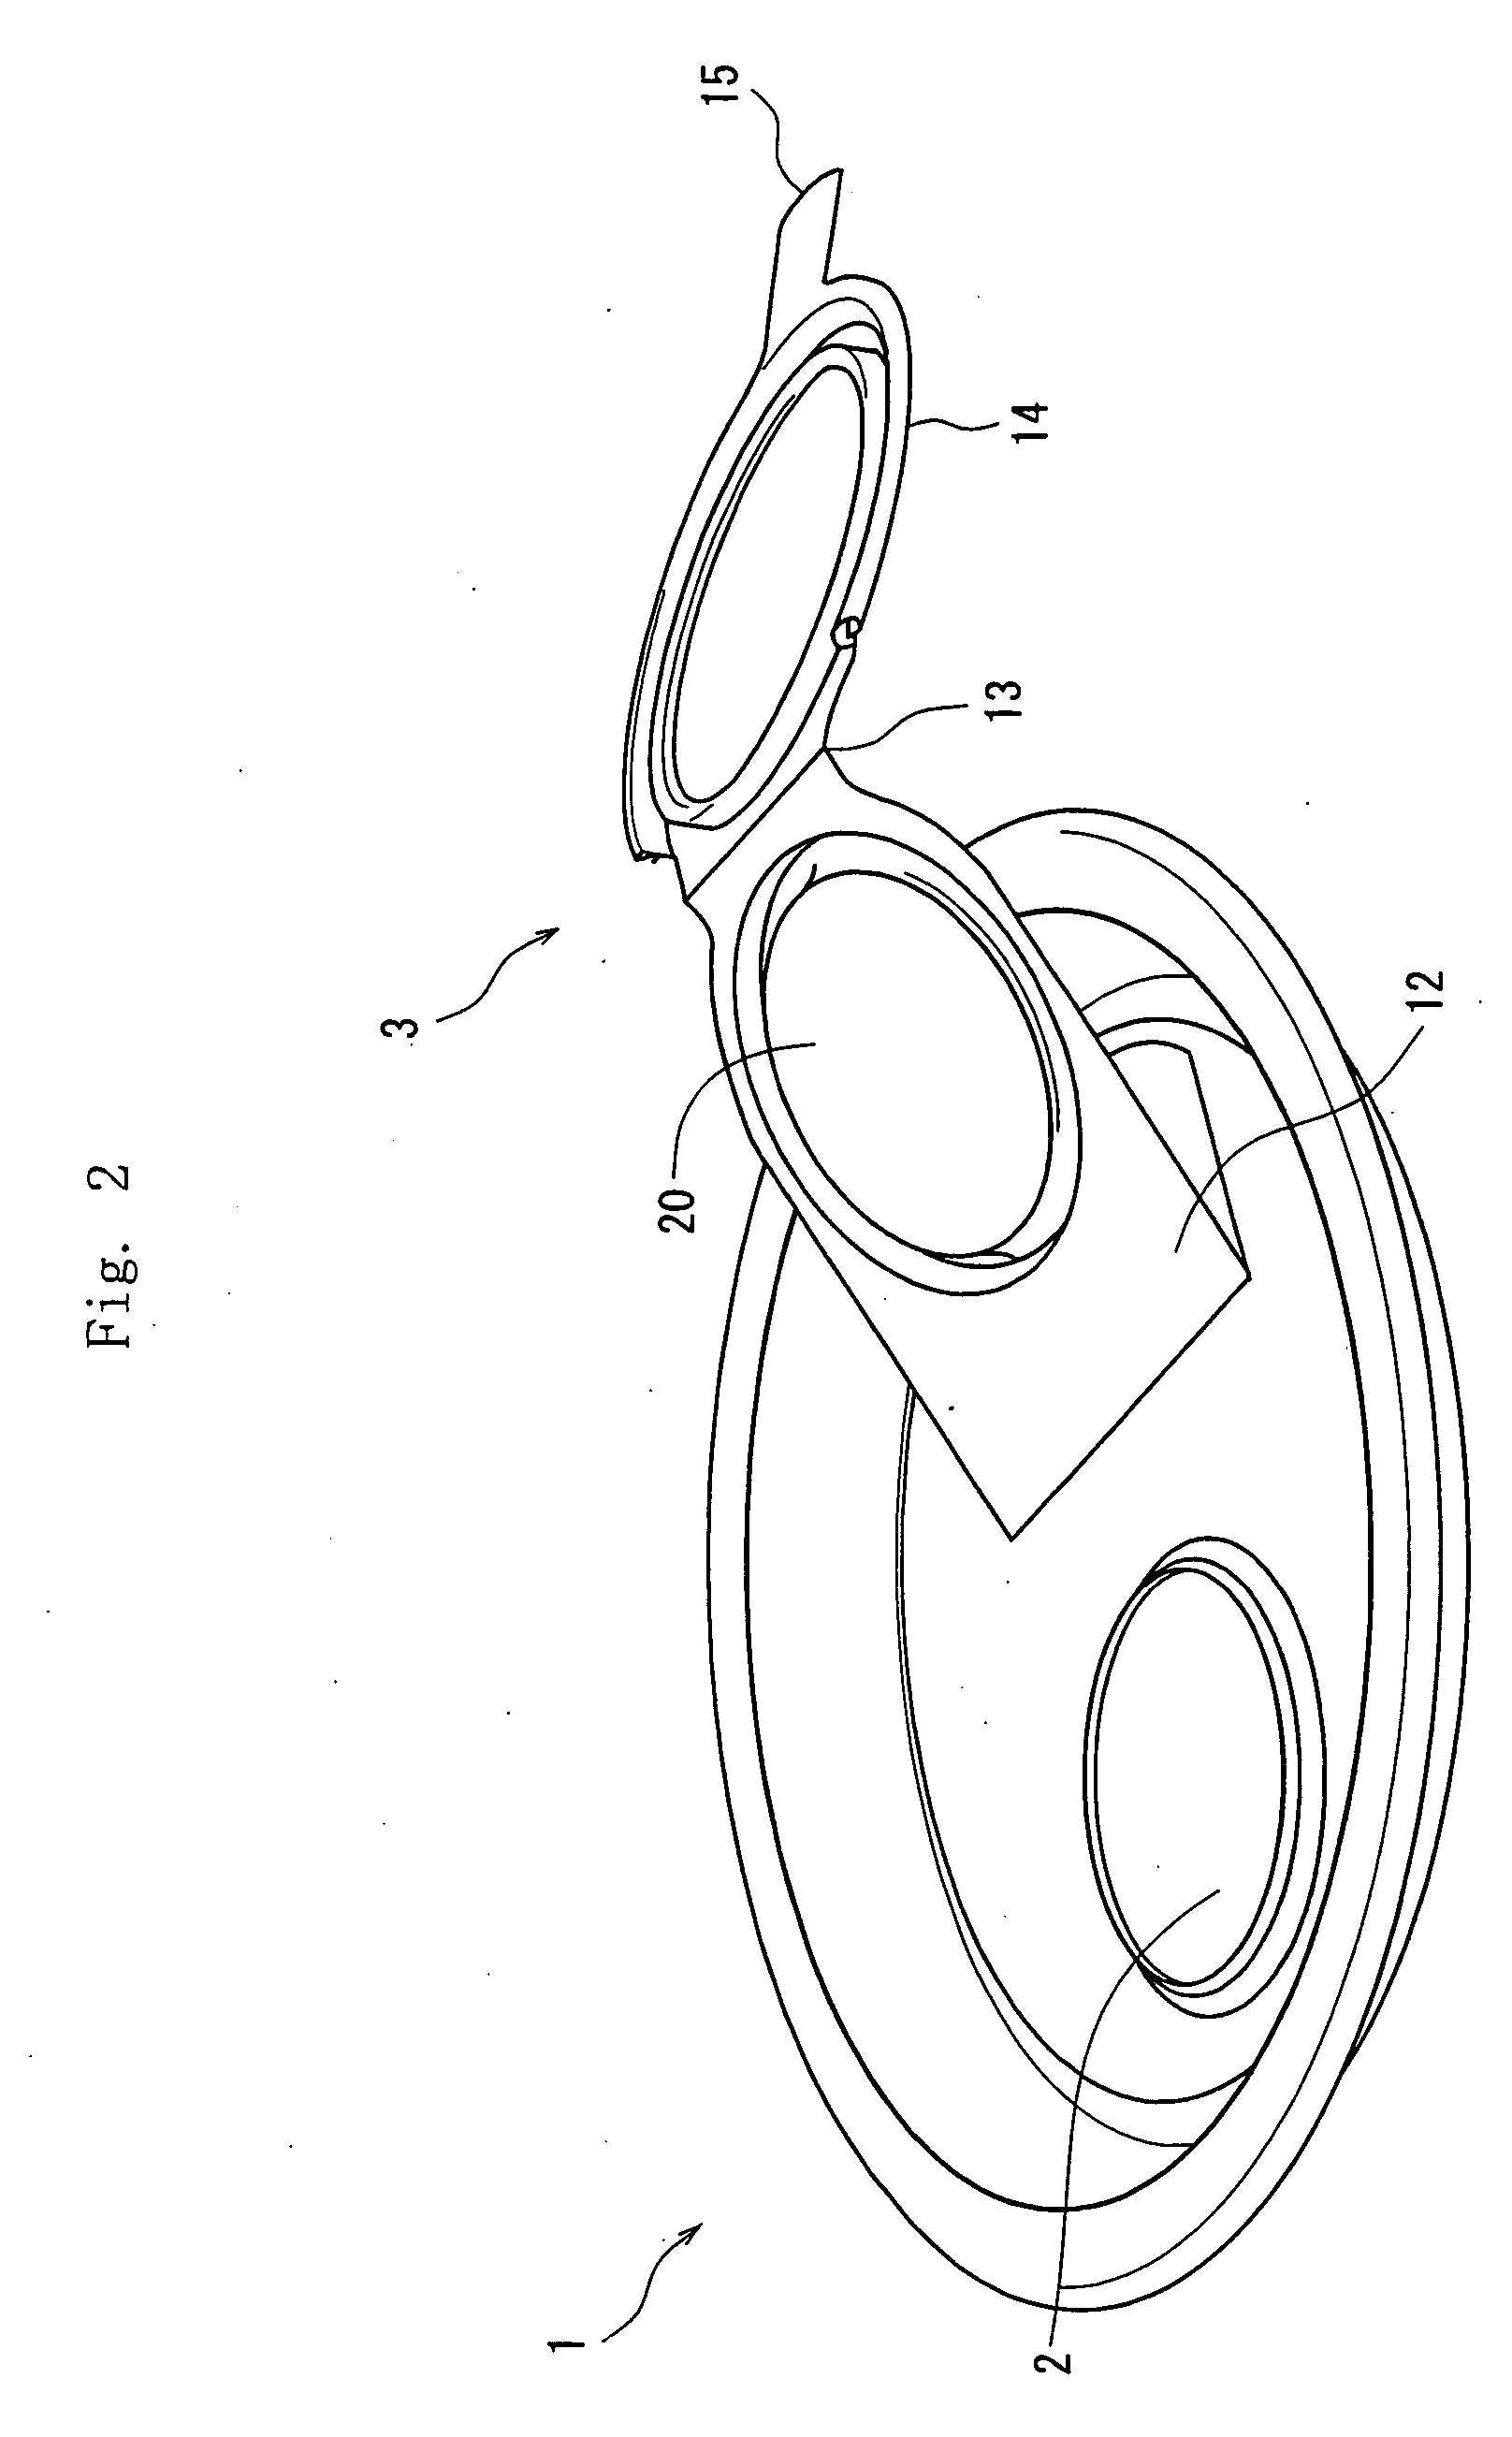 Easily openable container lid with resealability and method of producing the same